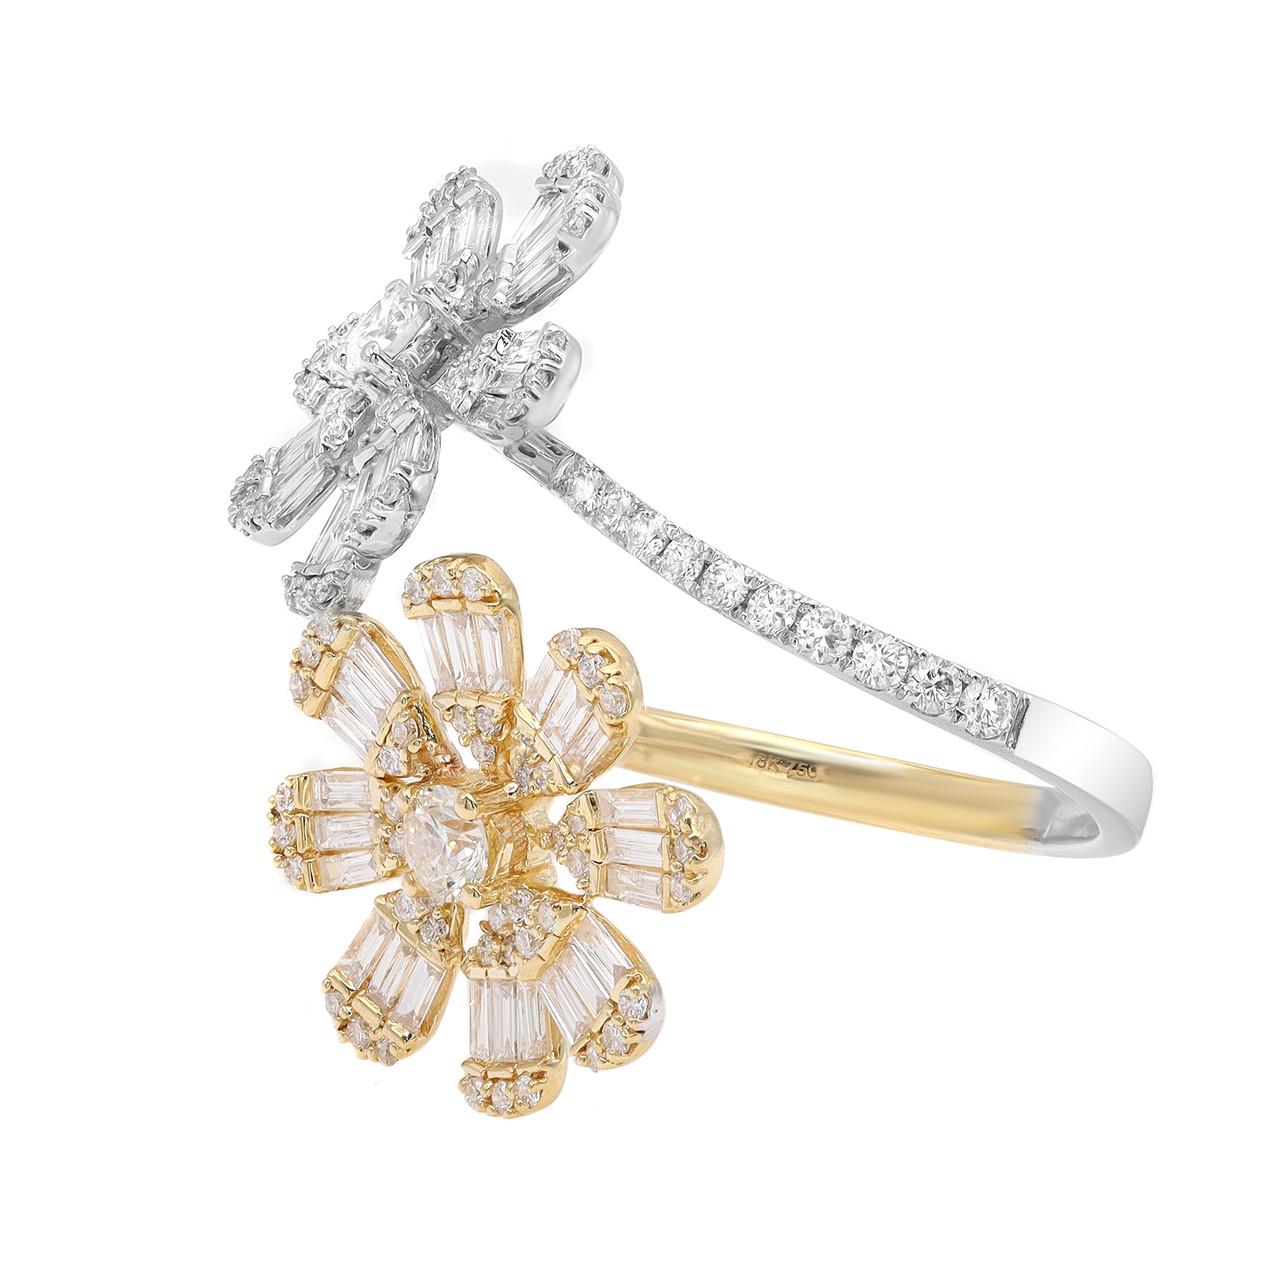 Introducing the breathtaking 1.56 Pavé Diamond Flower Ring in 18K White & Yellow Gold, a masterpiece from Elizabeth Fine Jewelry. Step into a world of exquisite craftsmanship and award-winning design, where every piece is meticulously handcrafted to